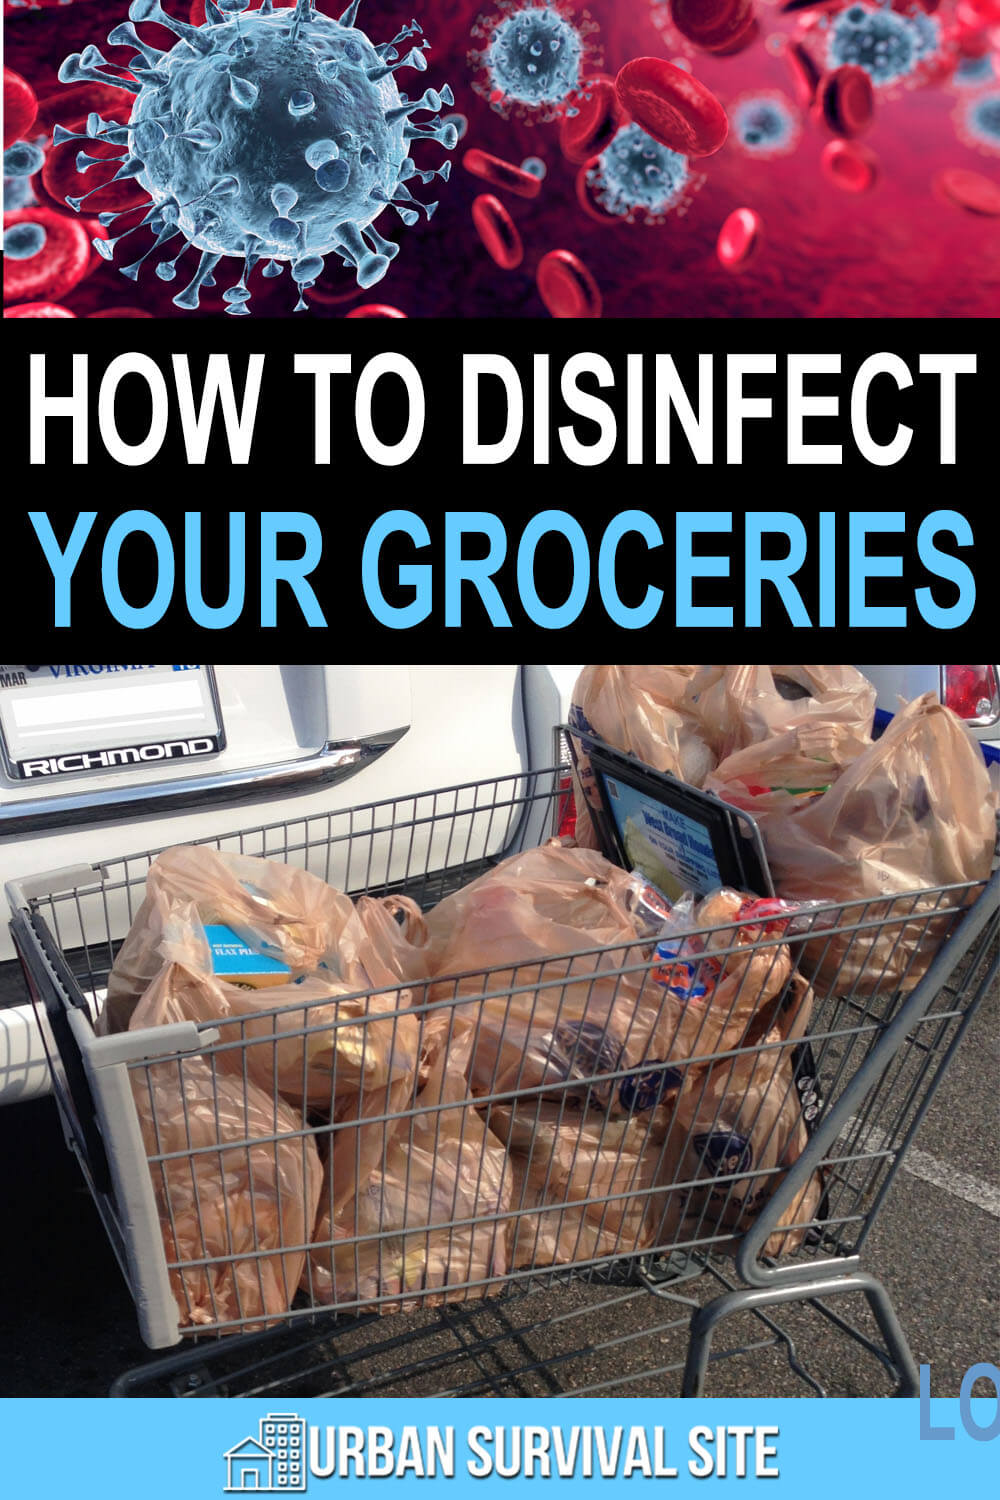 How To Disinfect Your Groceries